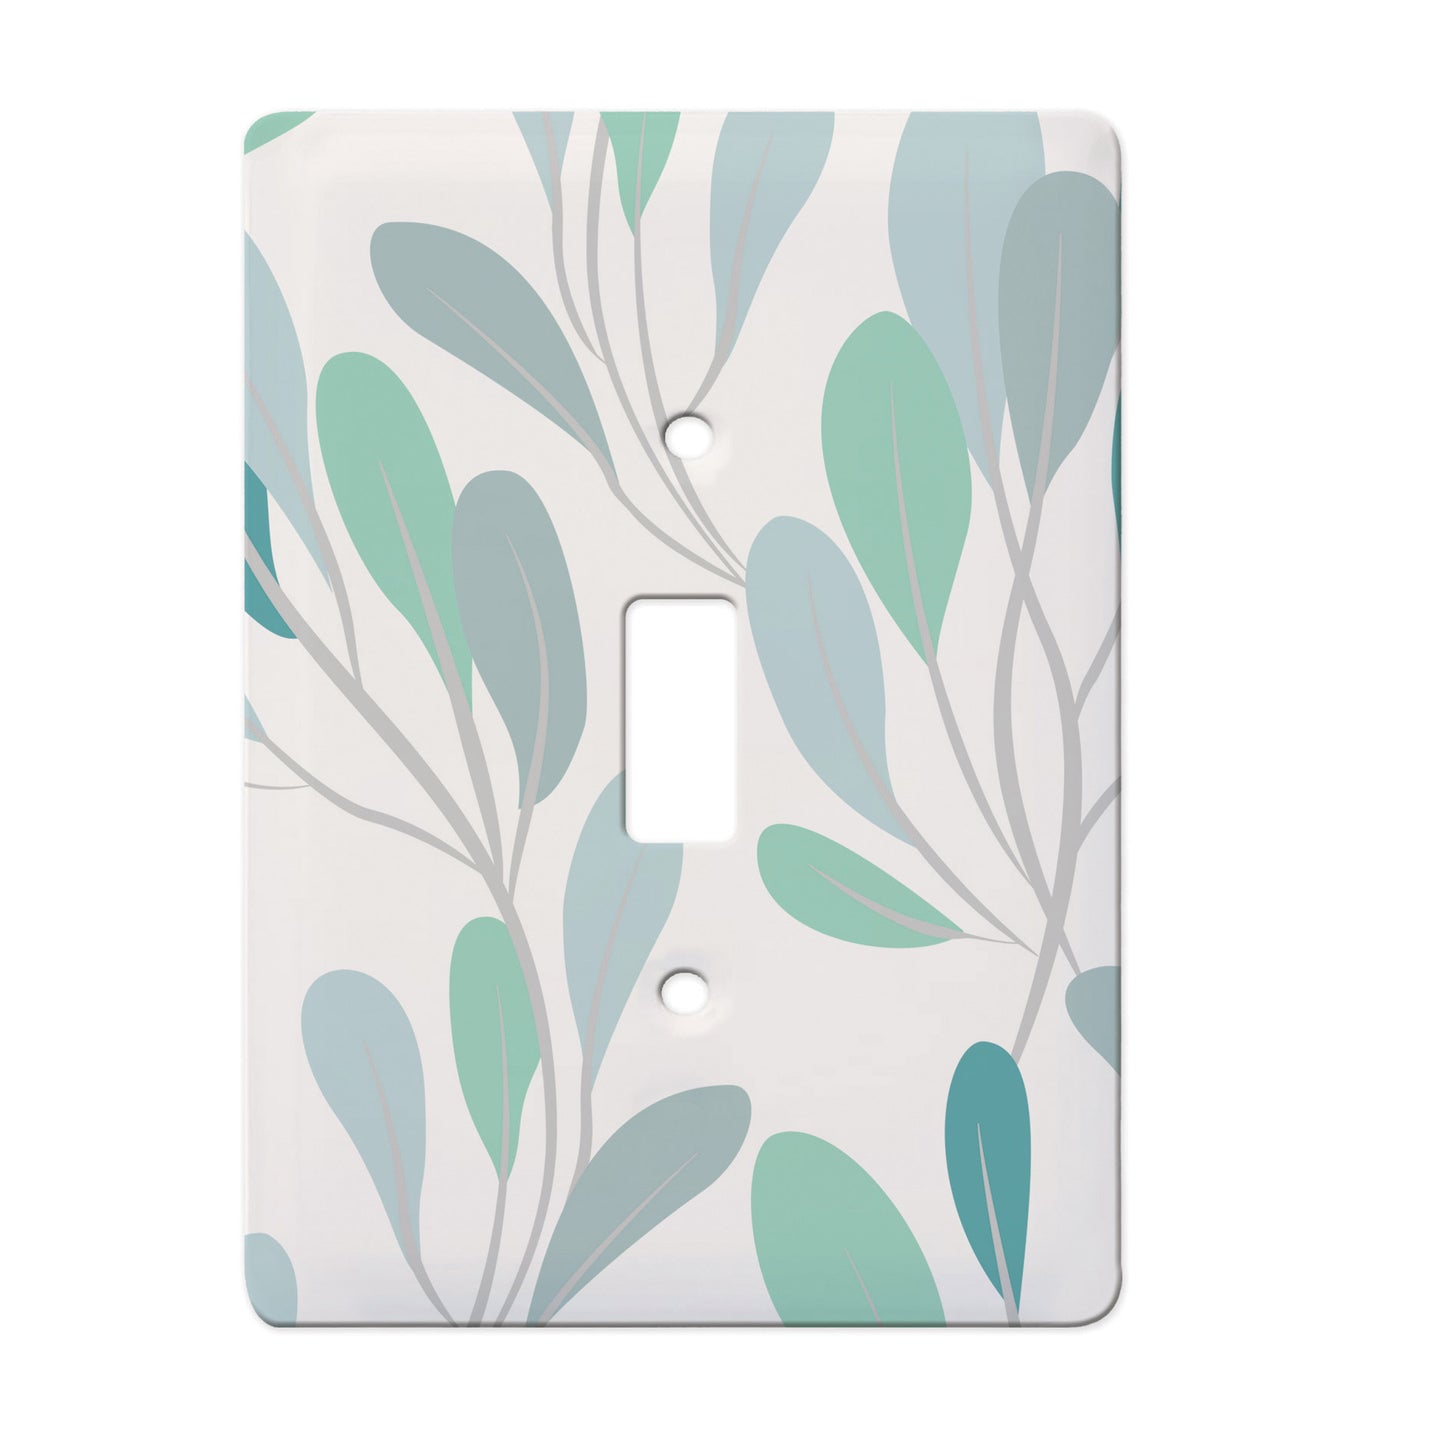 white single toggle ceramic switch plate featuring teal and blue sea vine graphic.